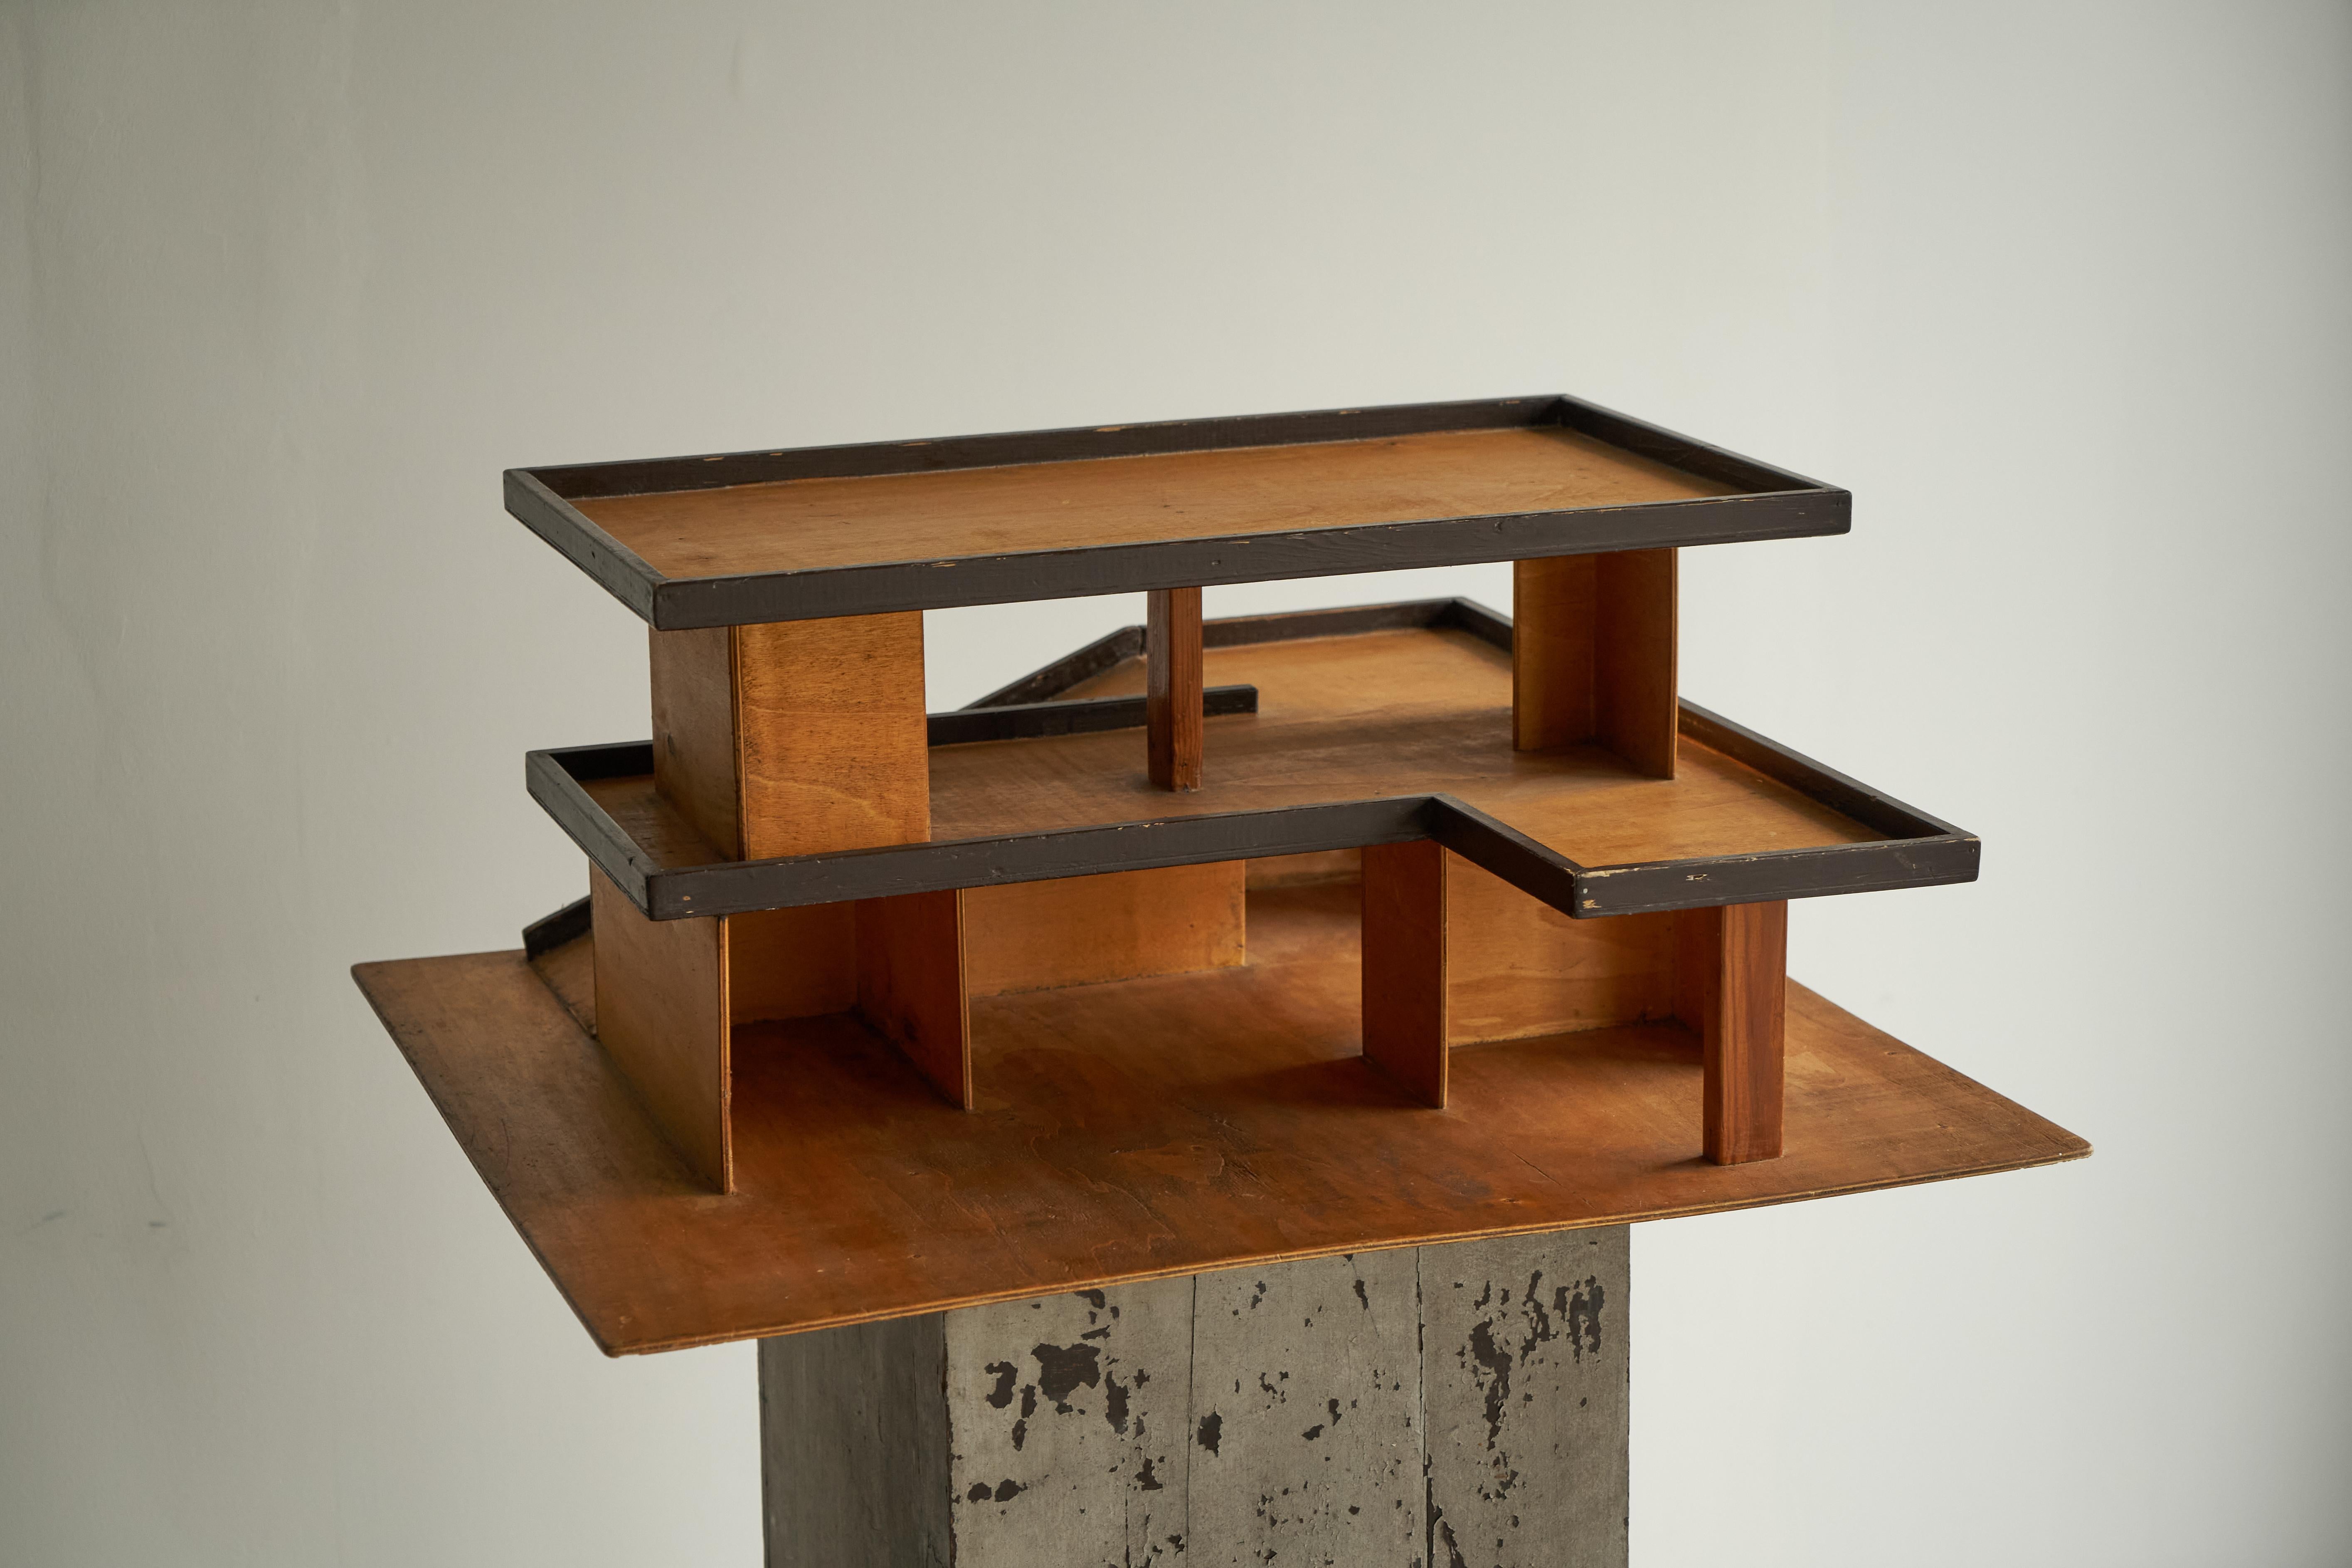 European Modernist Architectural Model in Stained Plywood 1950s For Sale